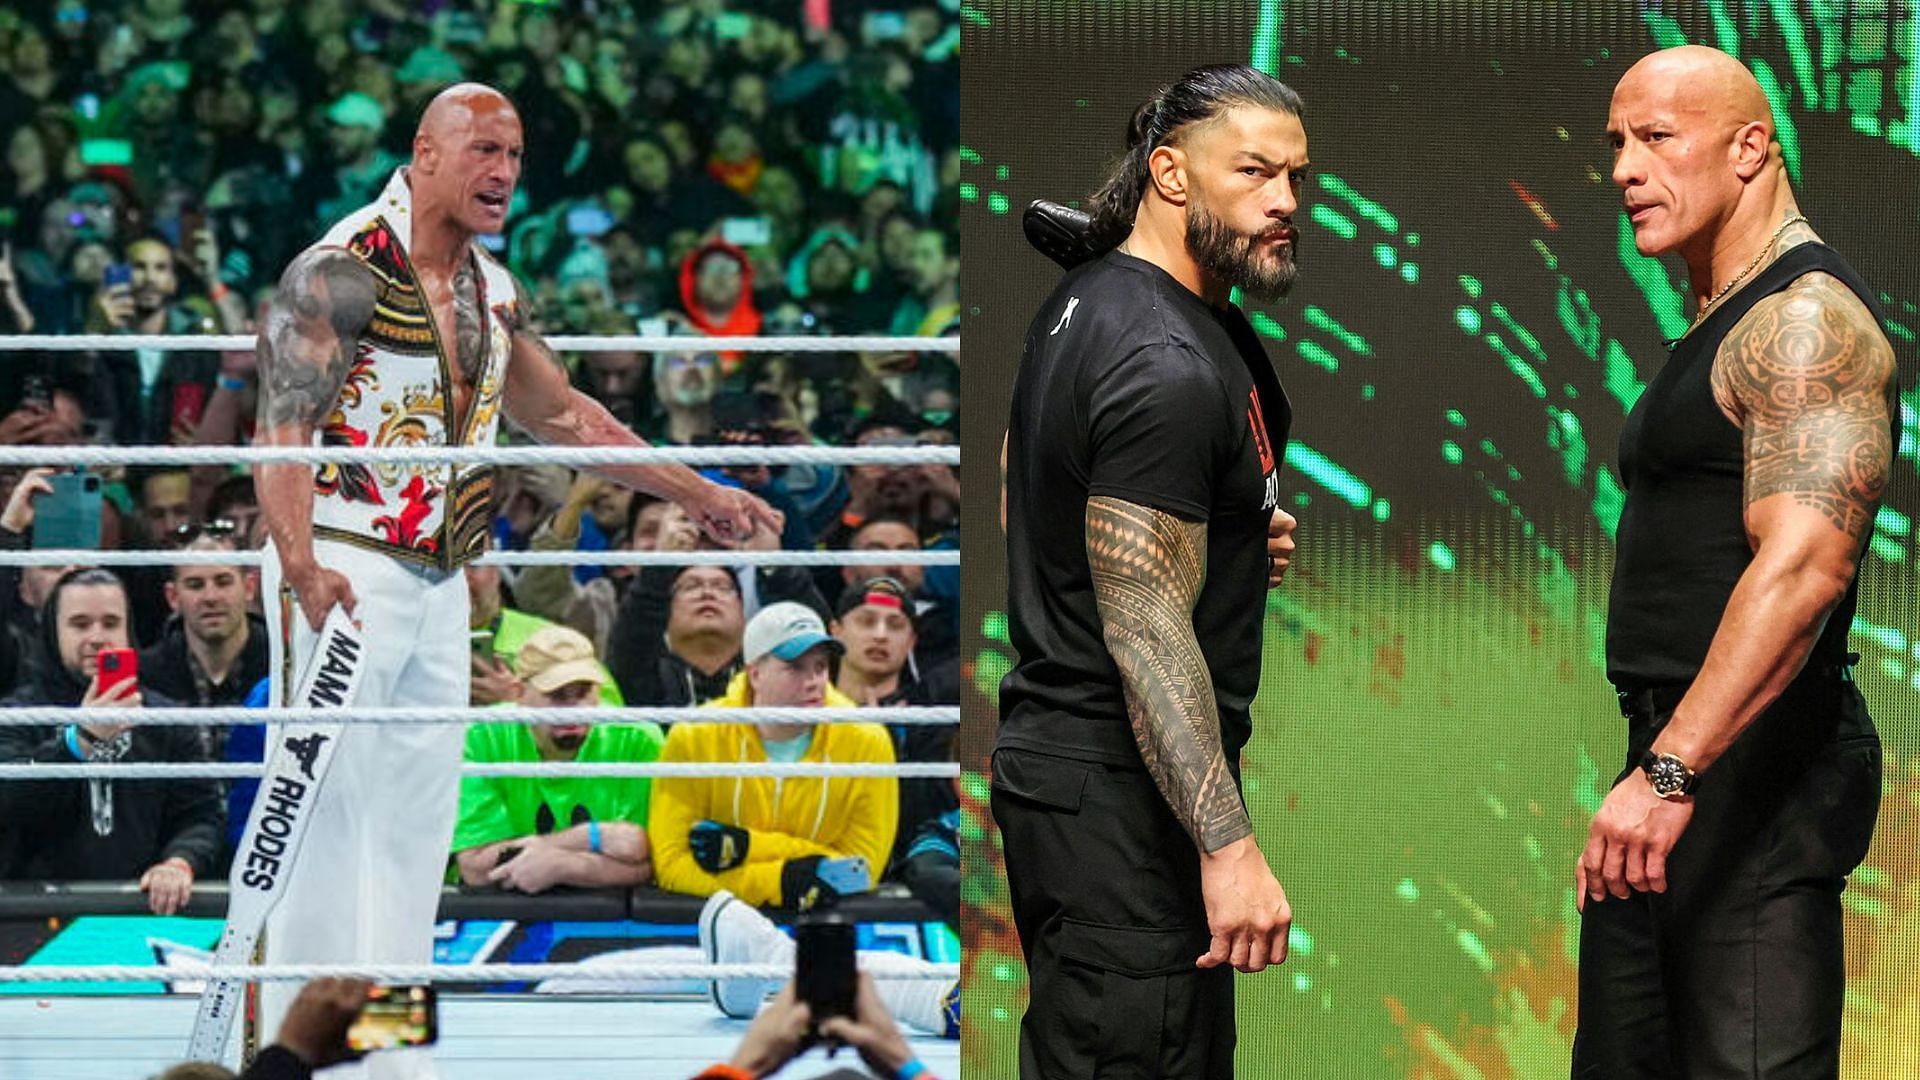 The Rock and Roman Reigns teamed up on Night 1 of WrestleMania 40